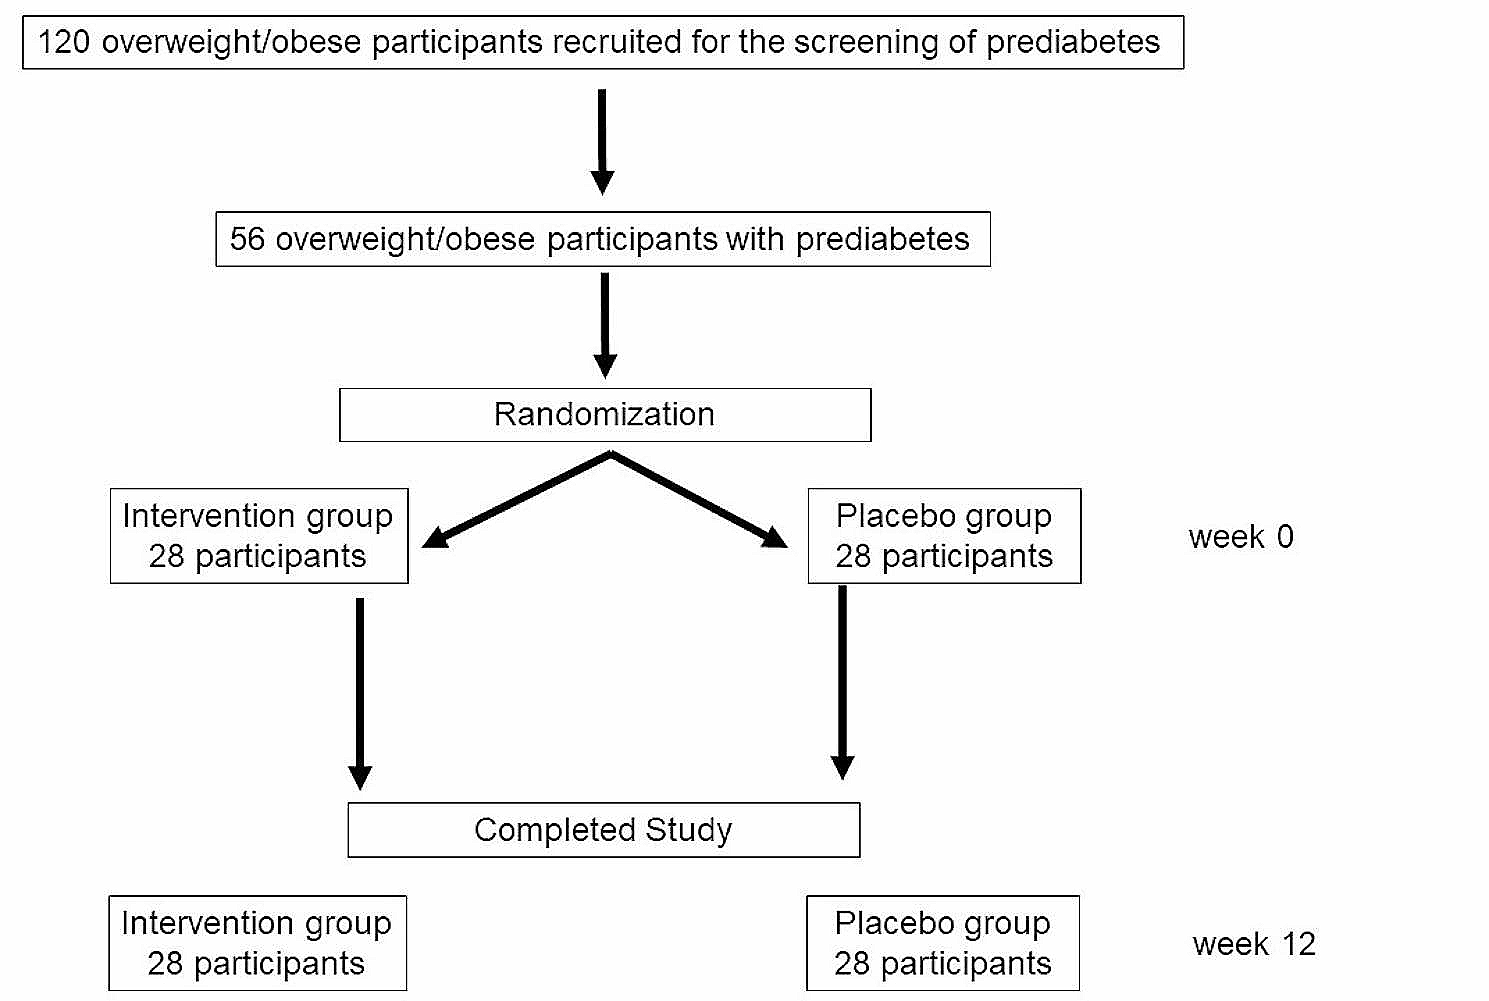 Tremella fuciformis beverage improves glycated hemoglobin A1c and waist circumference in overweight/obese prediabetic subjects: a randomized controlled trial